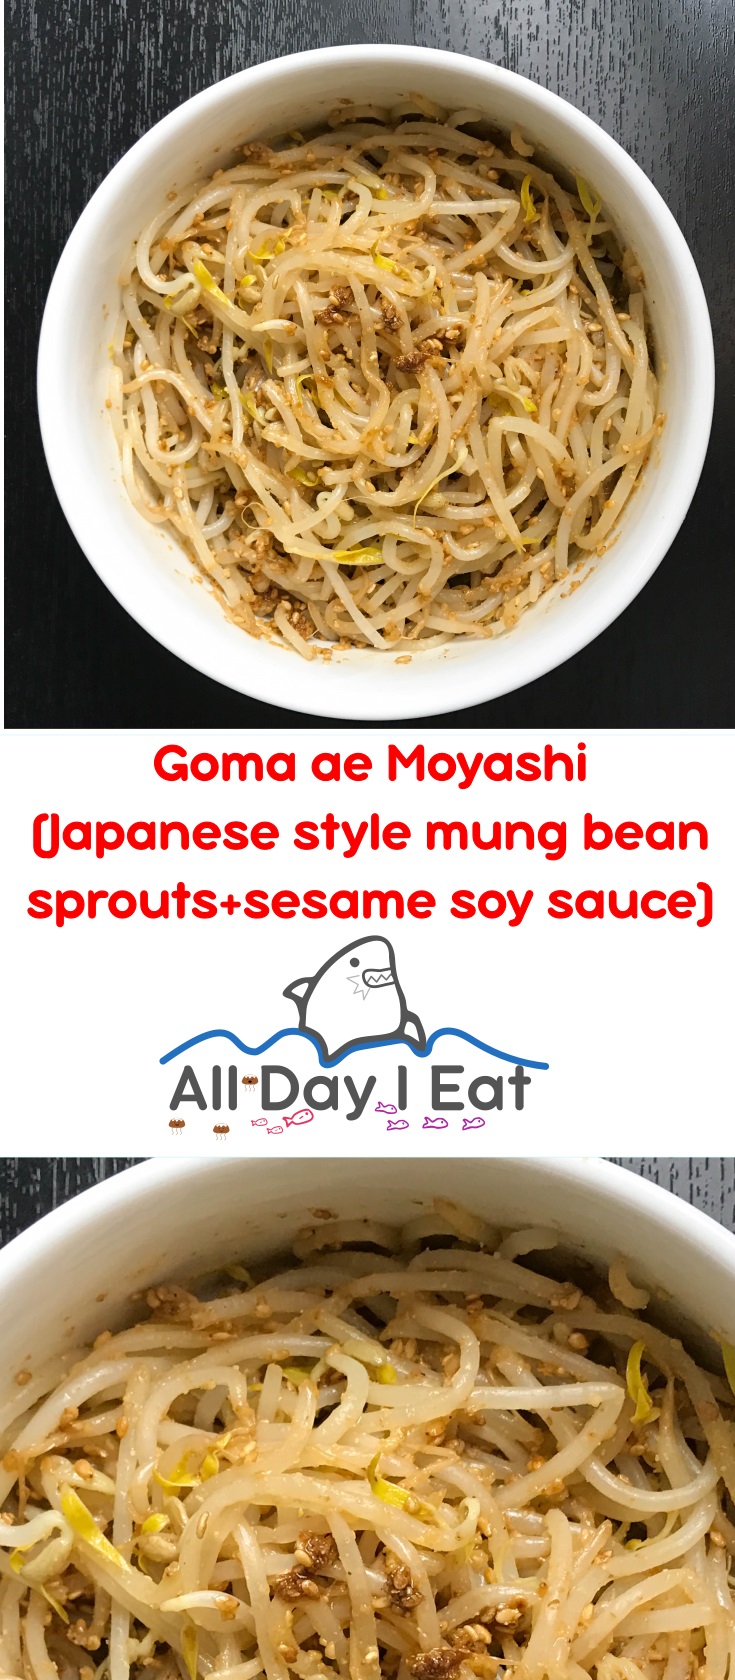 Moyashi Goma-ae (Japanese style mung bean sprouts+sweet sesame soy) easy, tasty and healthy!! | www.alldayieat.com 